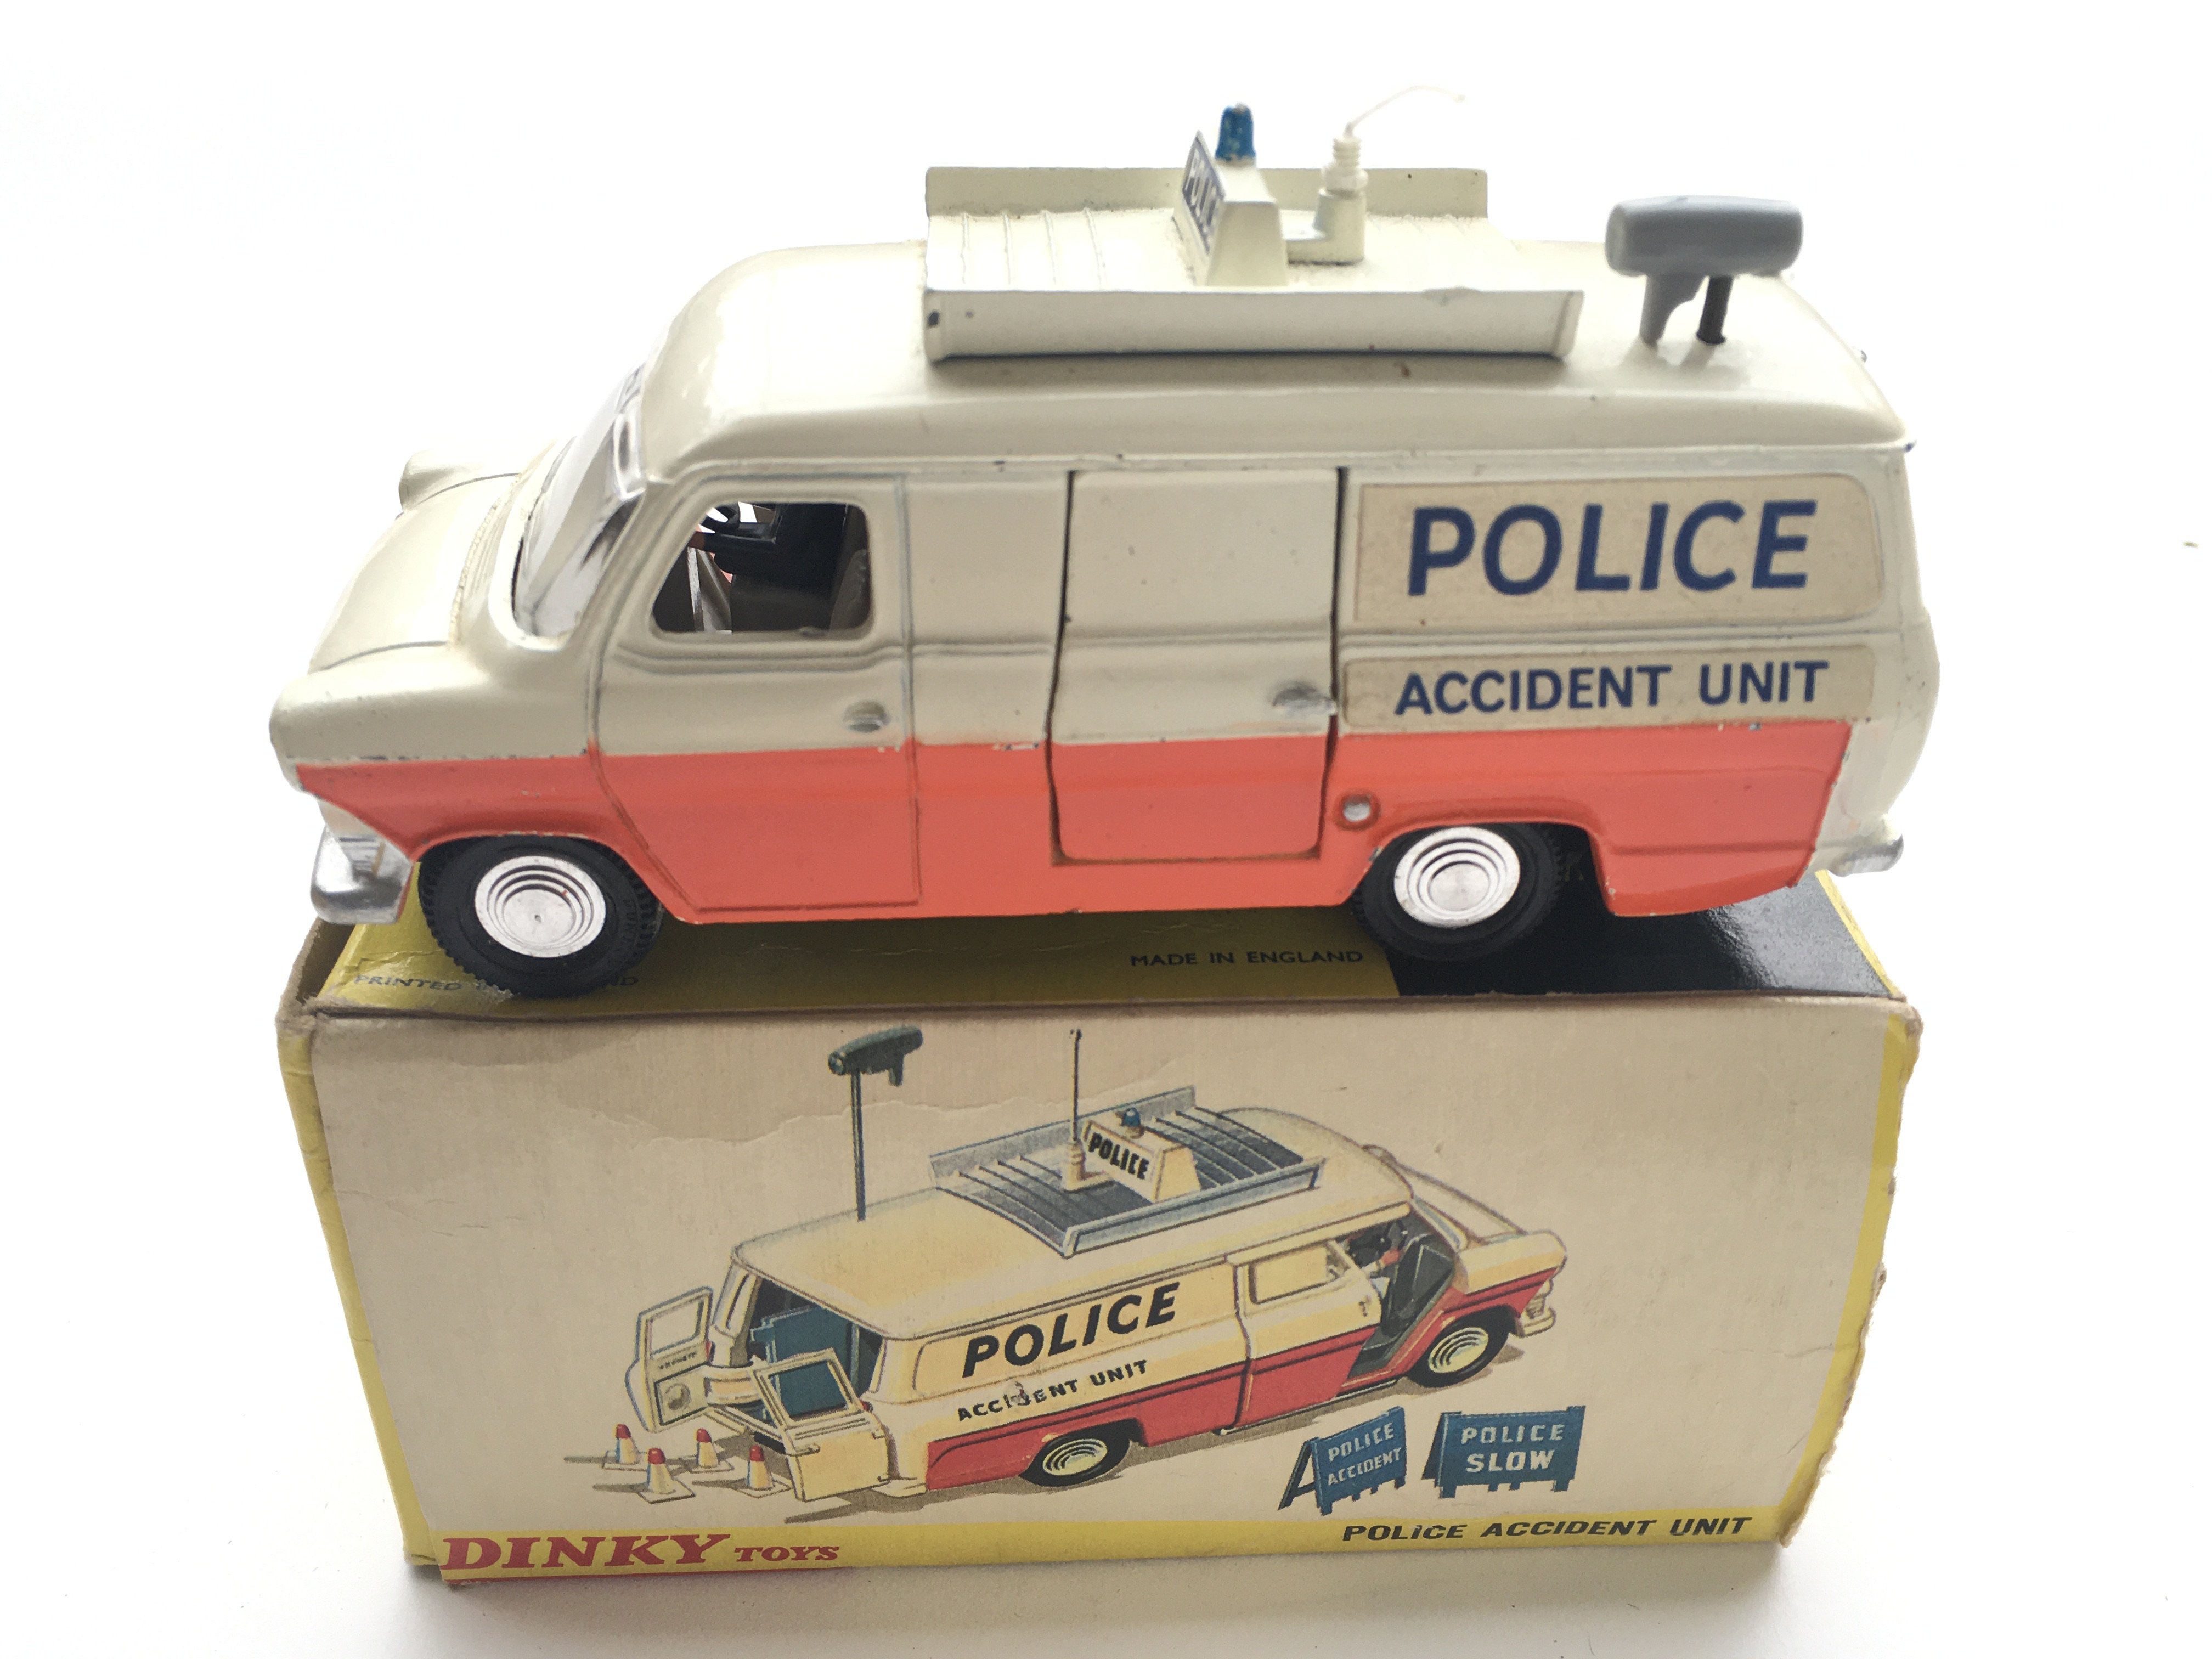 4 Boxed Dinky vehicles, #955 Fire Engine with exte - Image 5 of 5